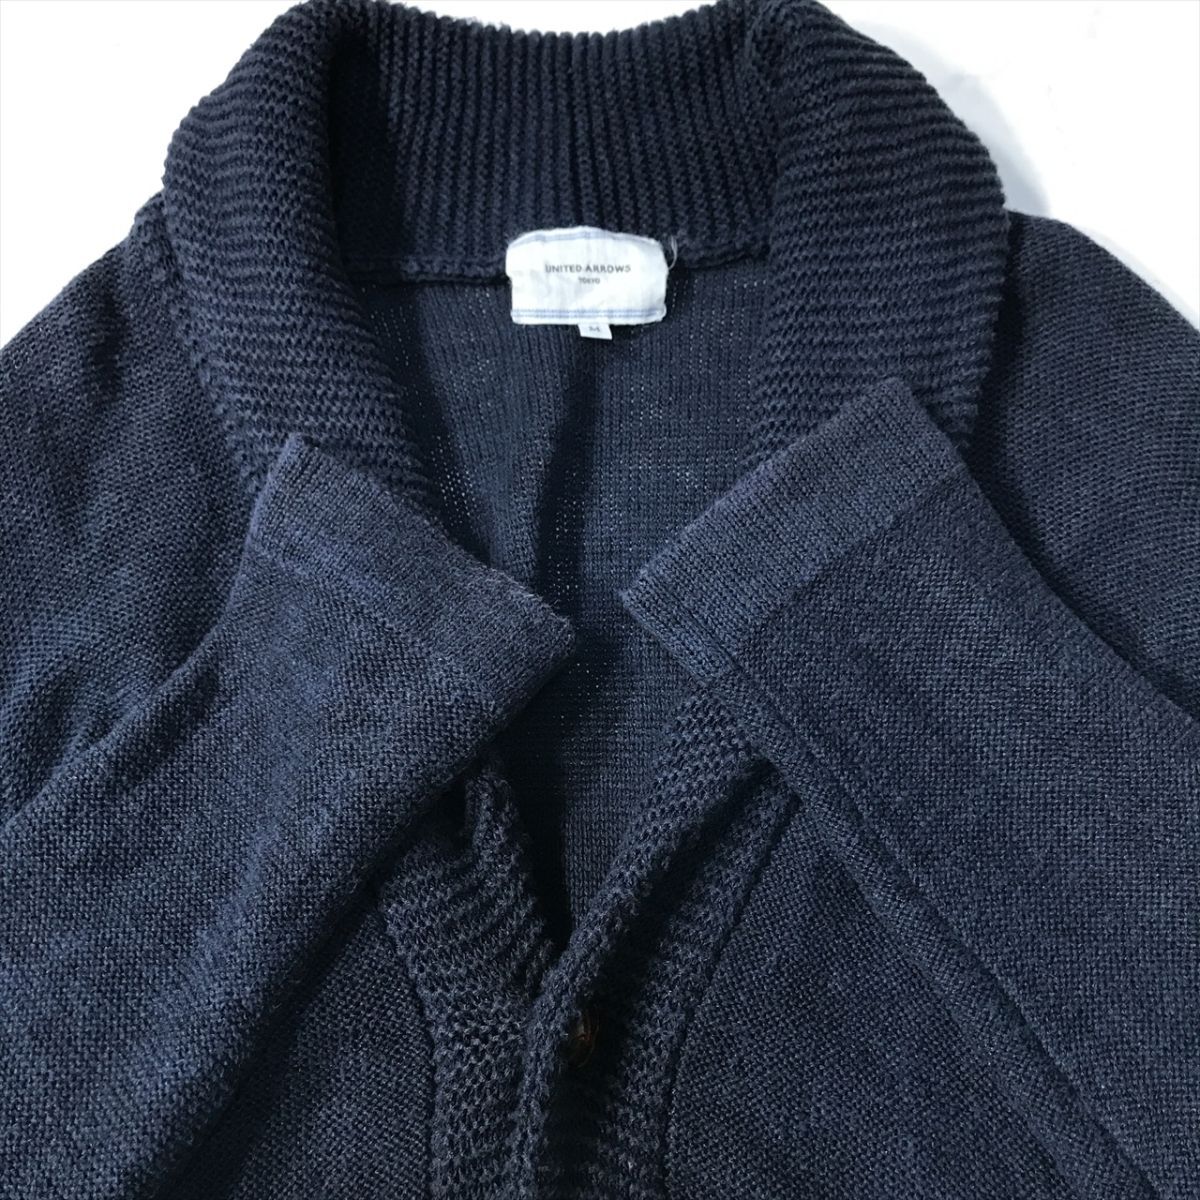 { superior article *}UNITED ARROWS United Arrows * cotton linen* cotton flax * knitted cardigan * sweater * navy * size M(MA6333)*S80